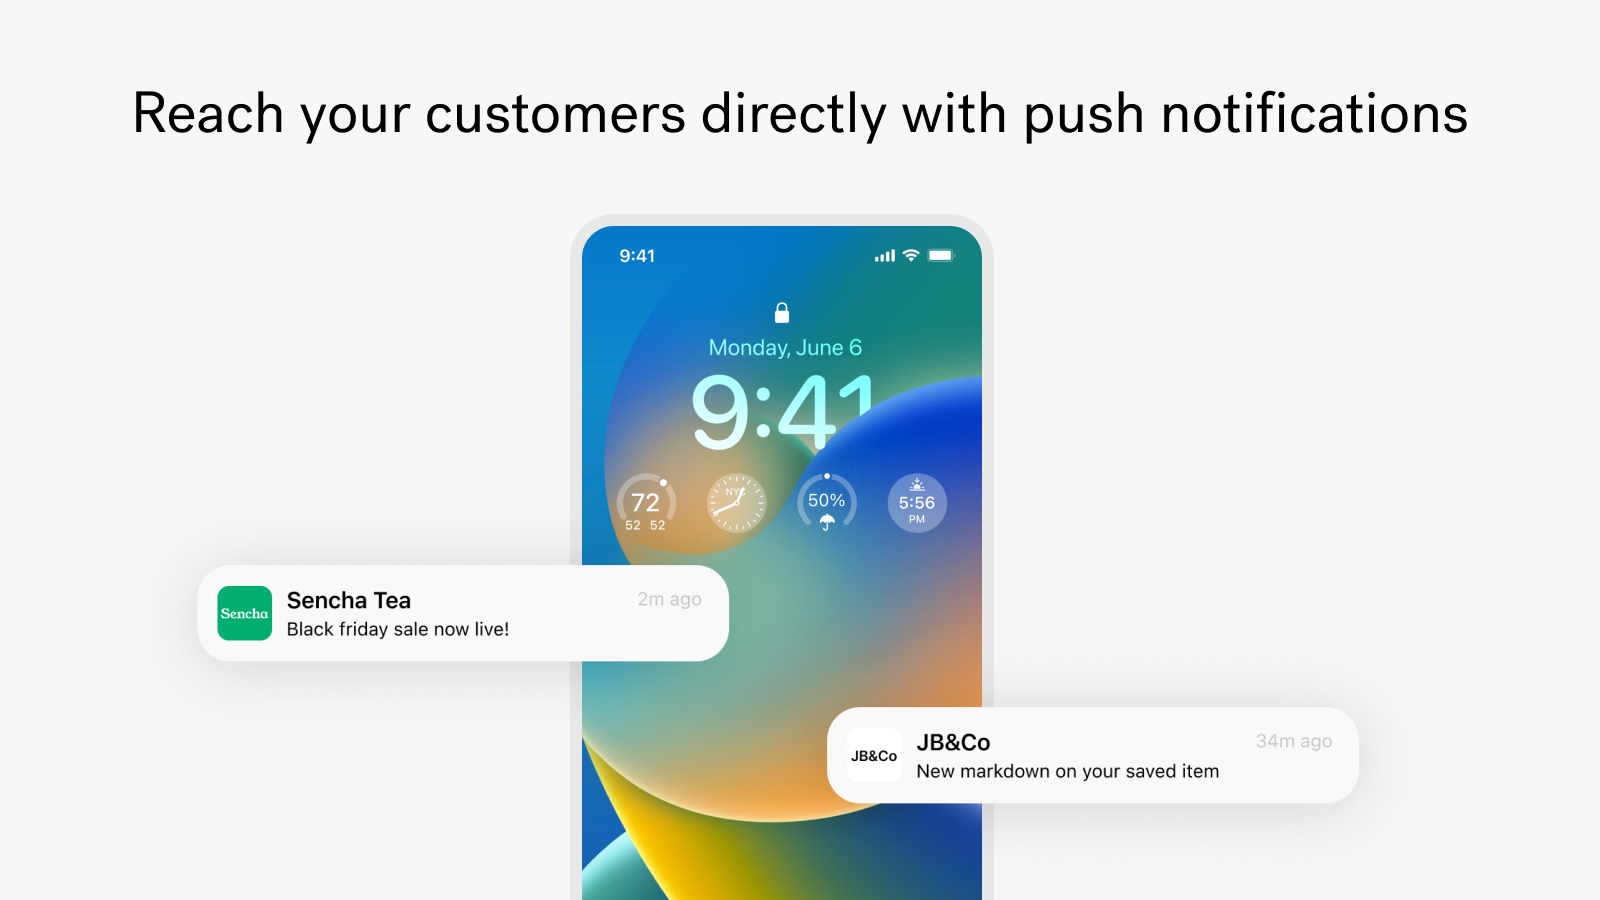 Reach your customers directly with push notifications